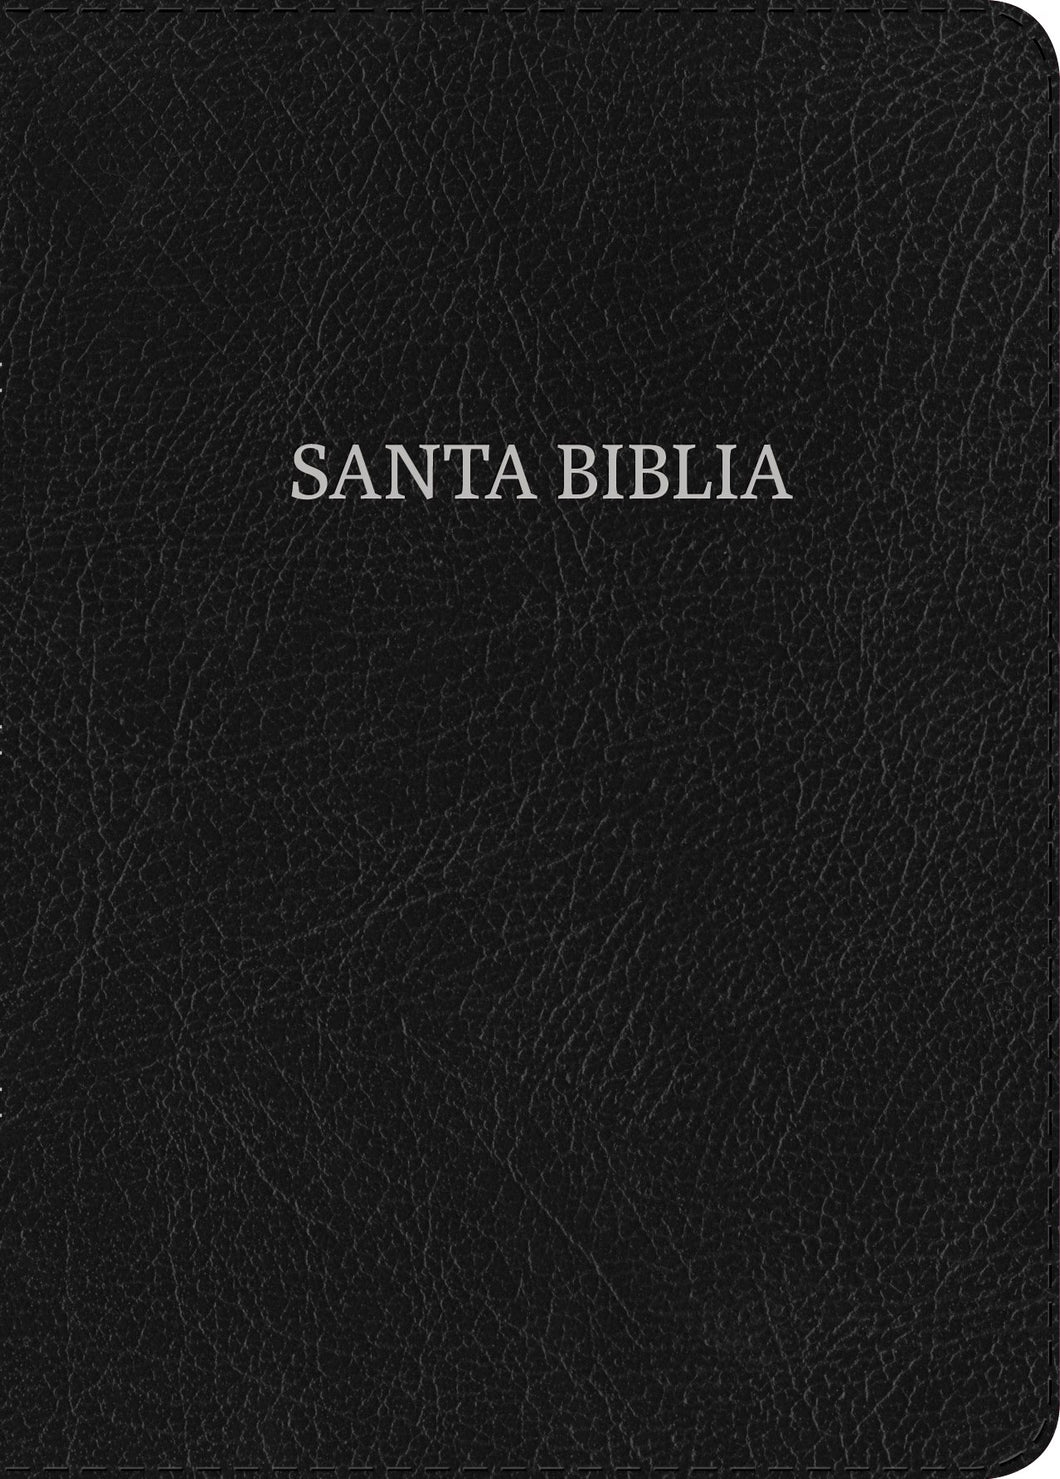 Spanish-RVR 1960 Giant Print Reference Bible (Biblia Letra Gigante con Referencias)-Black Bonded Leather Indexed